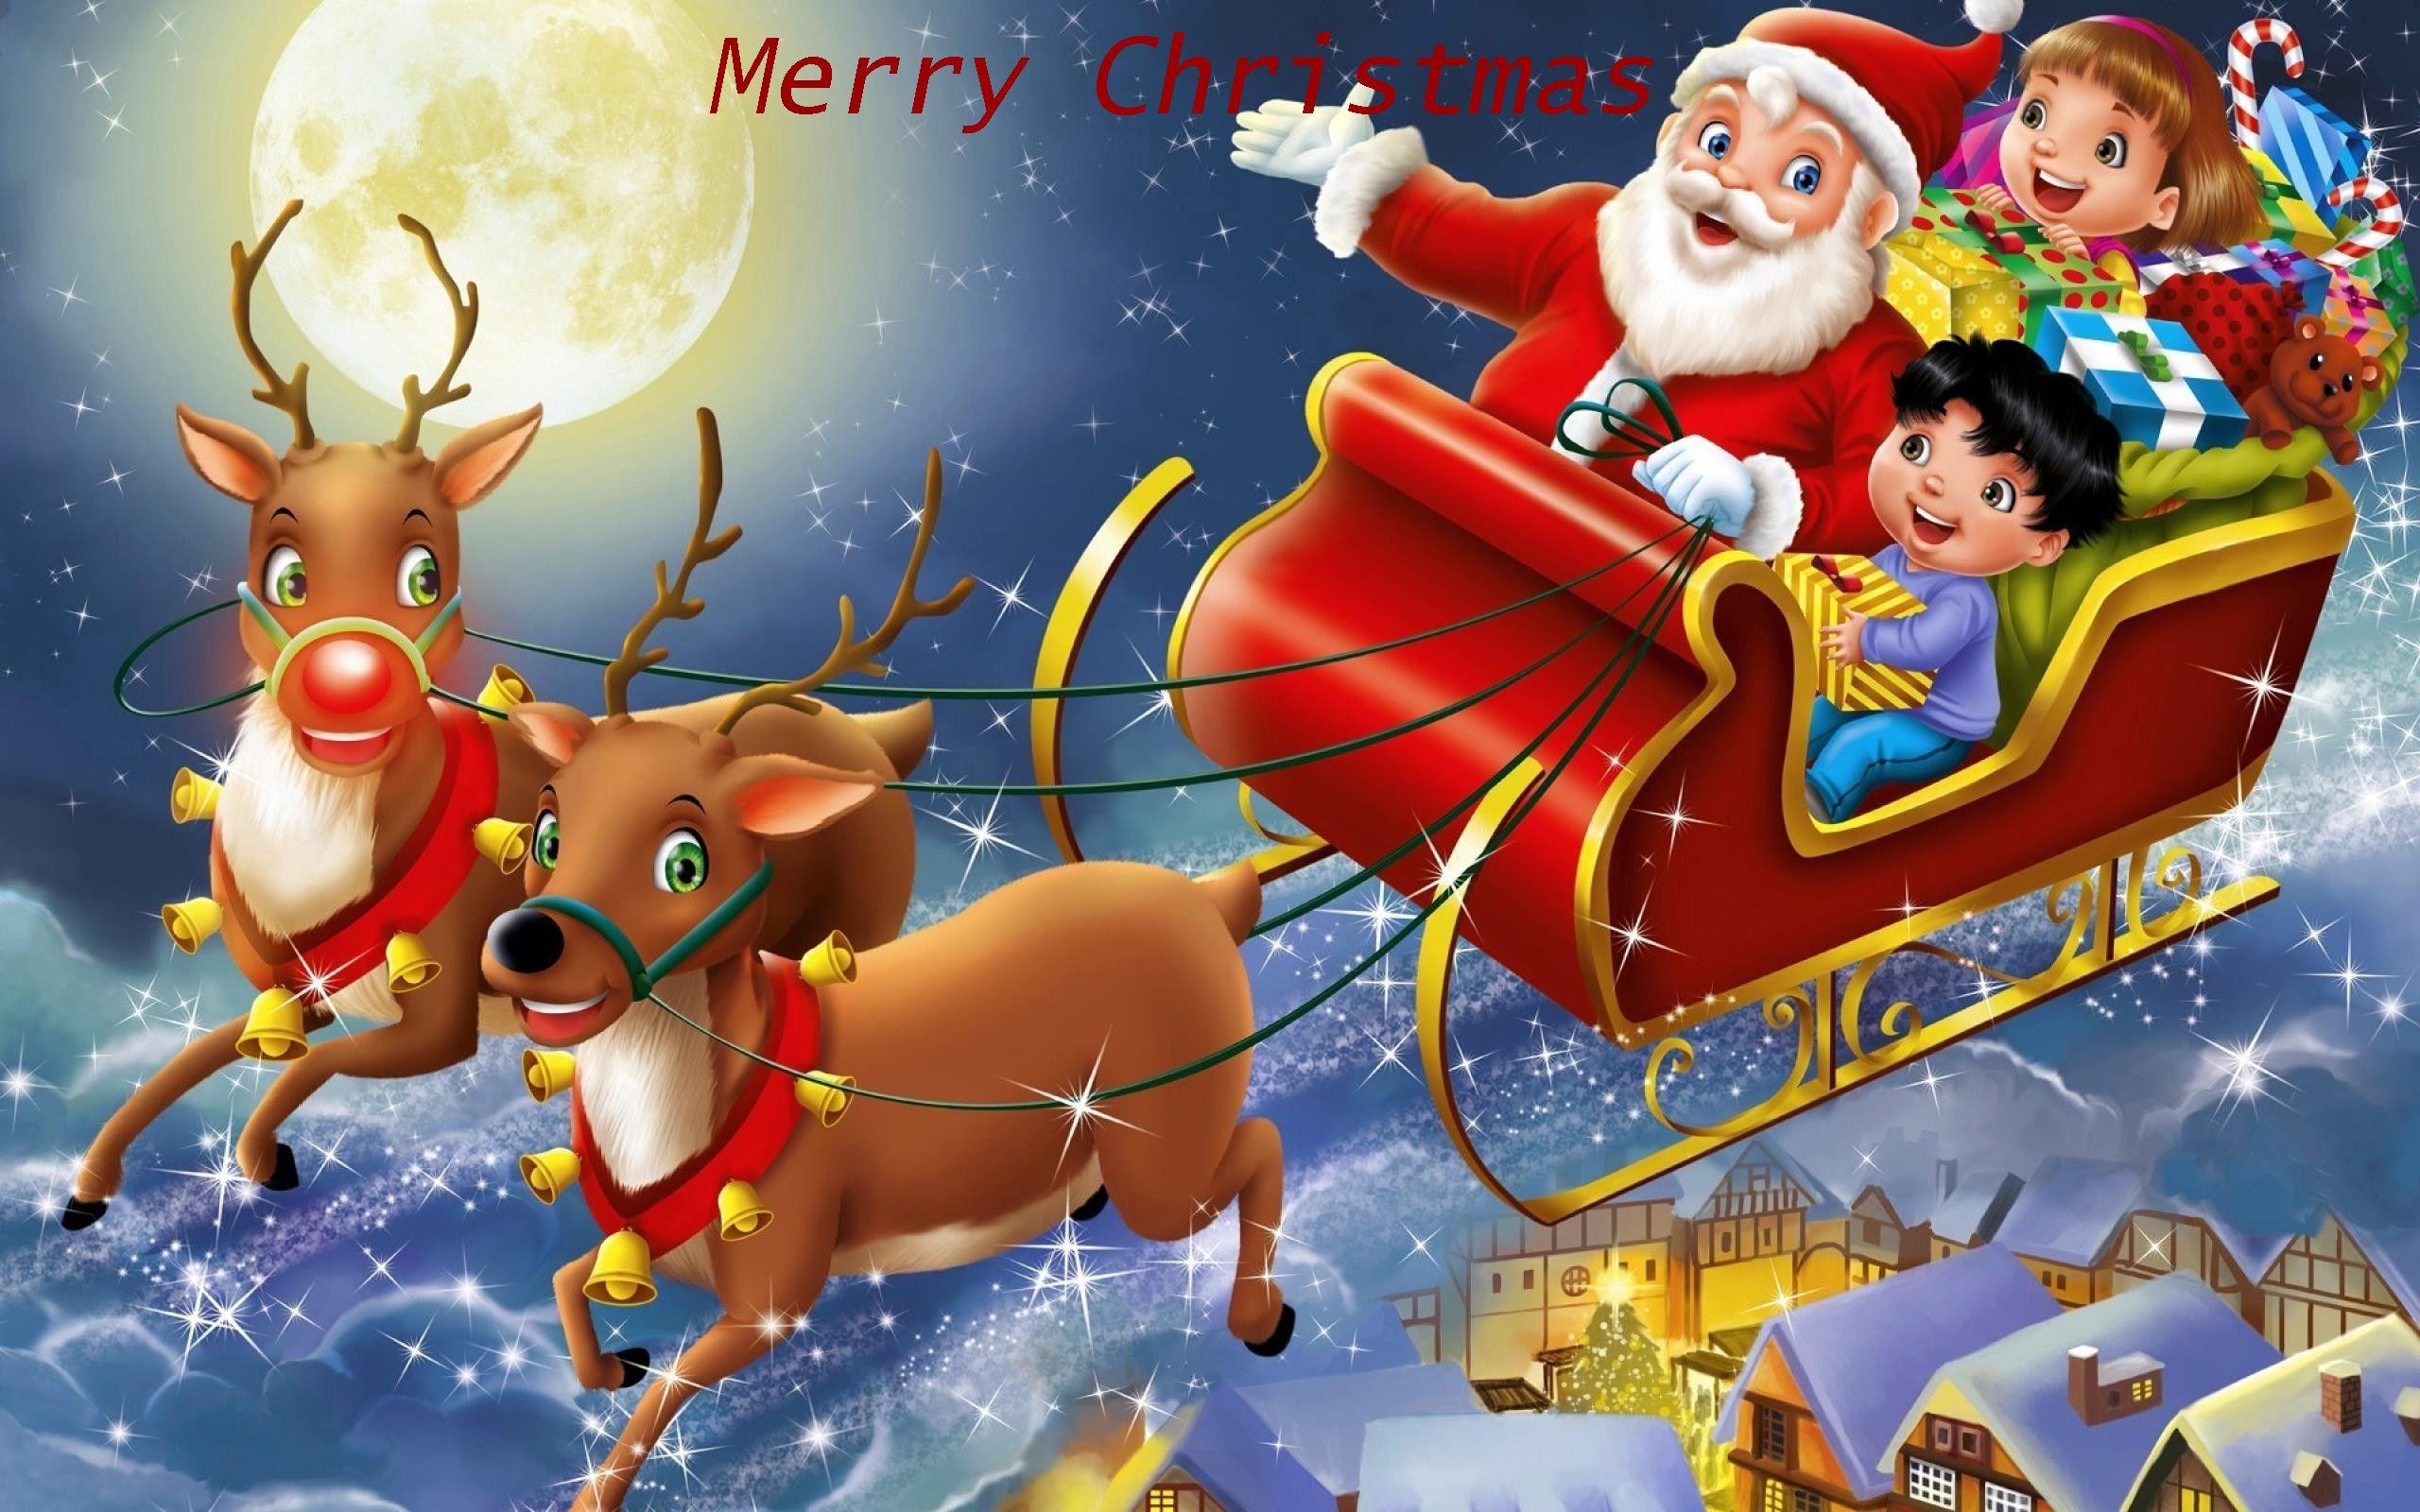 Free Animated Santa Claus Image Picture Wallpaper Photo